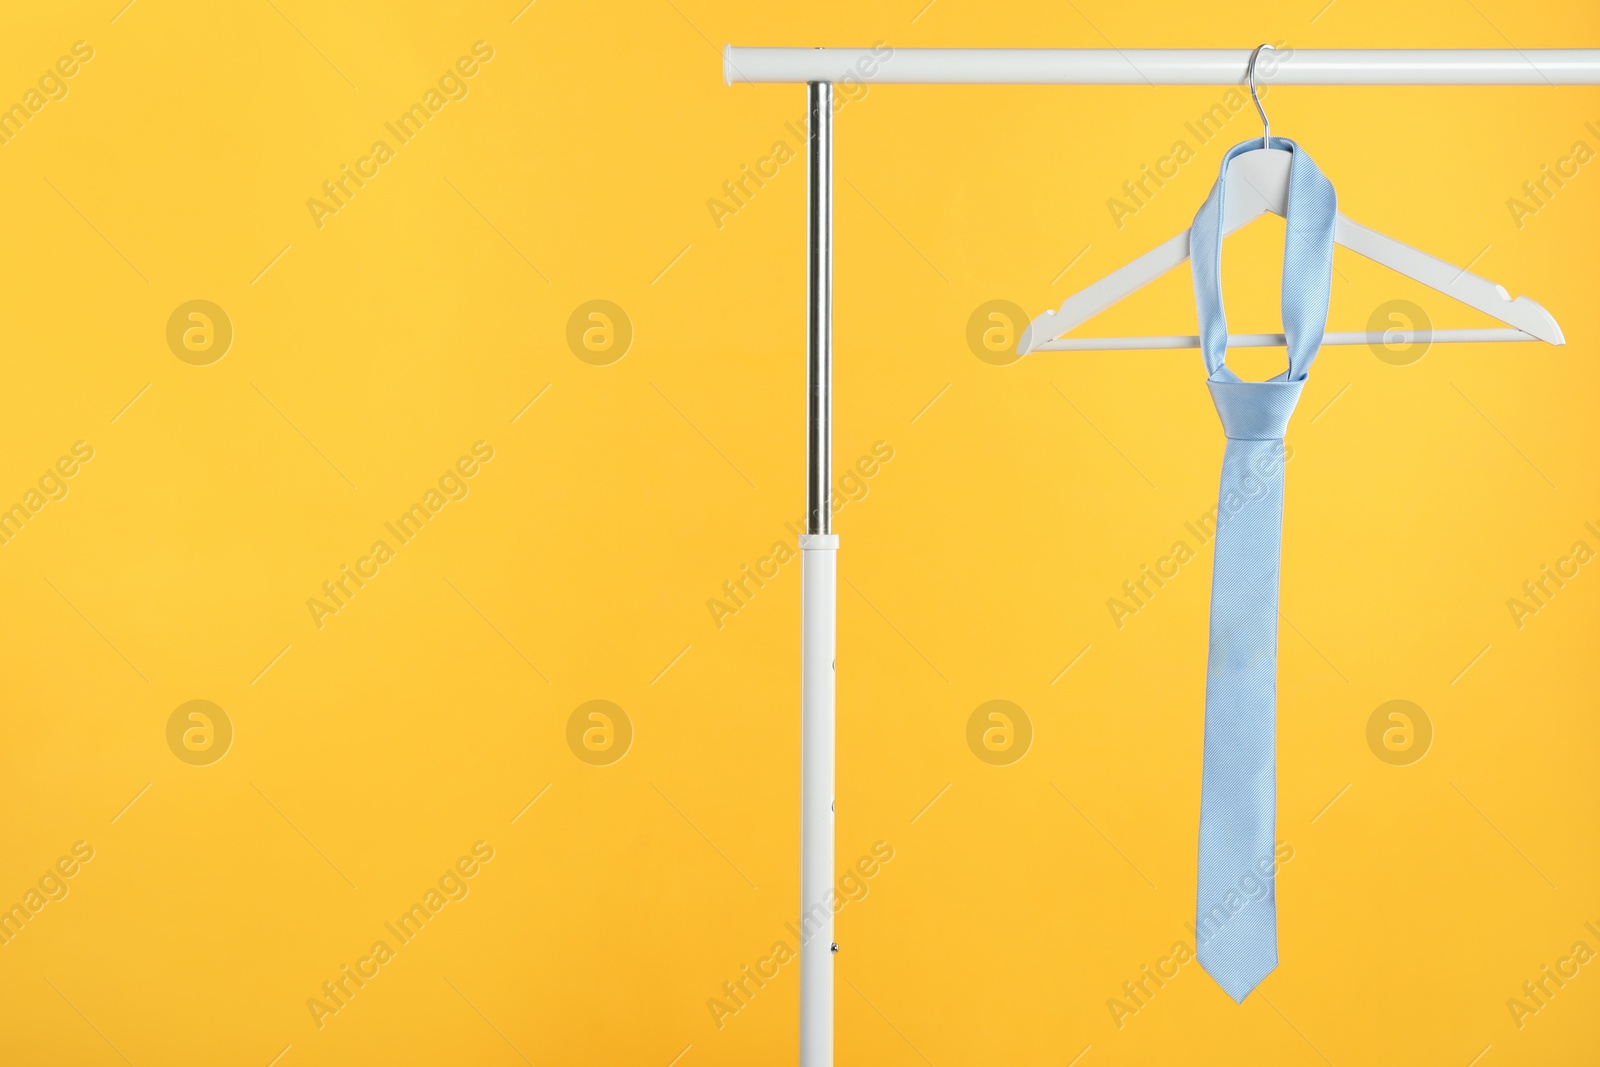 Photo of Hanger with light blue tie on rack against orange background. Space for text